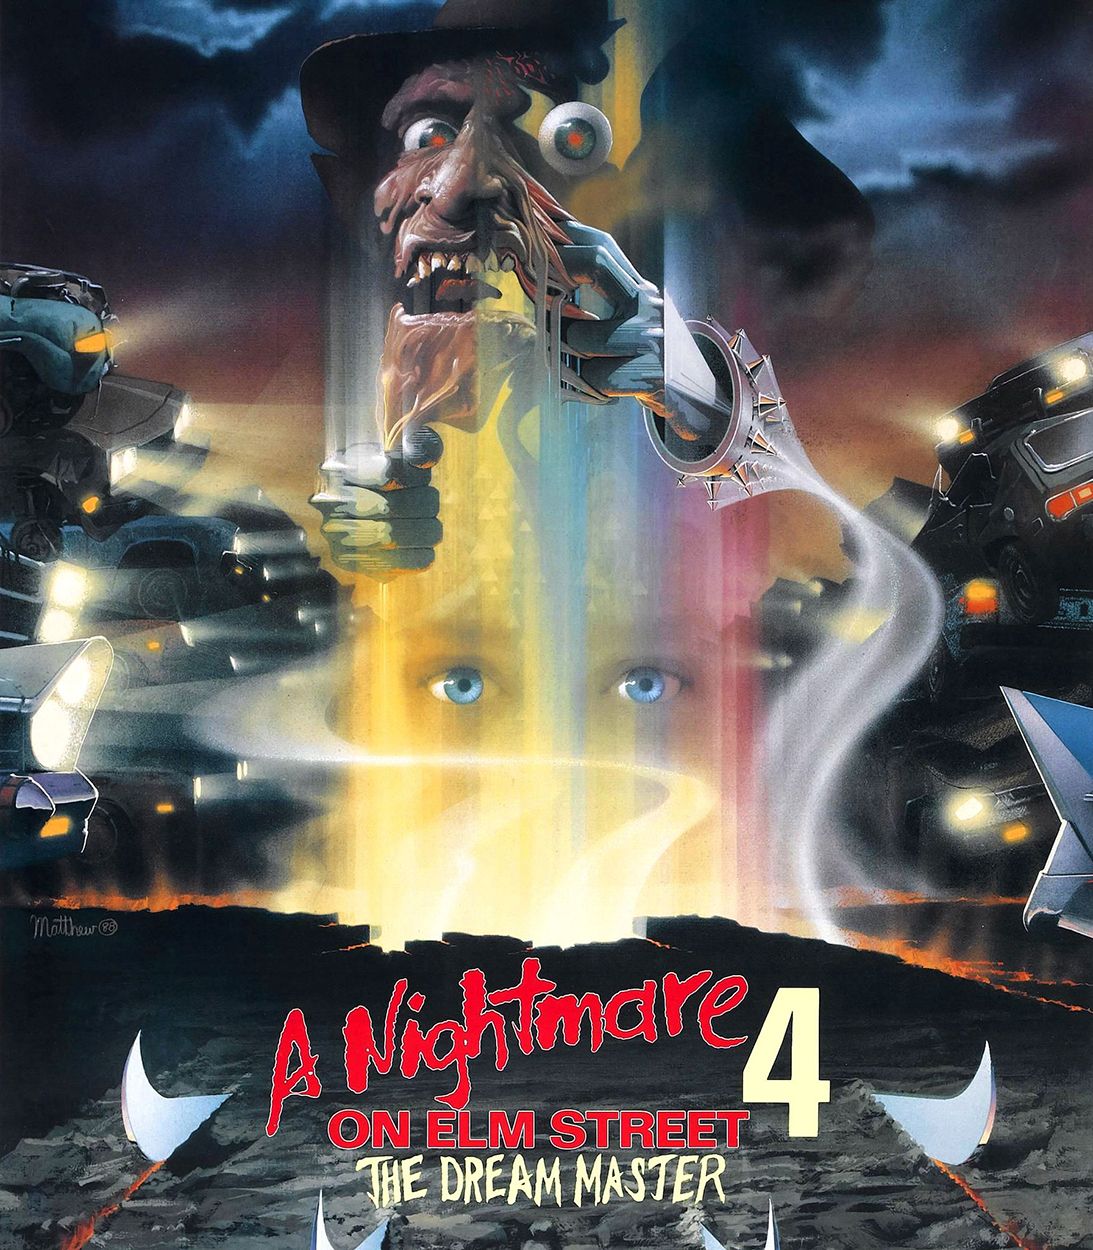 A Nightmare on Elm Street 4 The Dream Master poster vertical